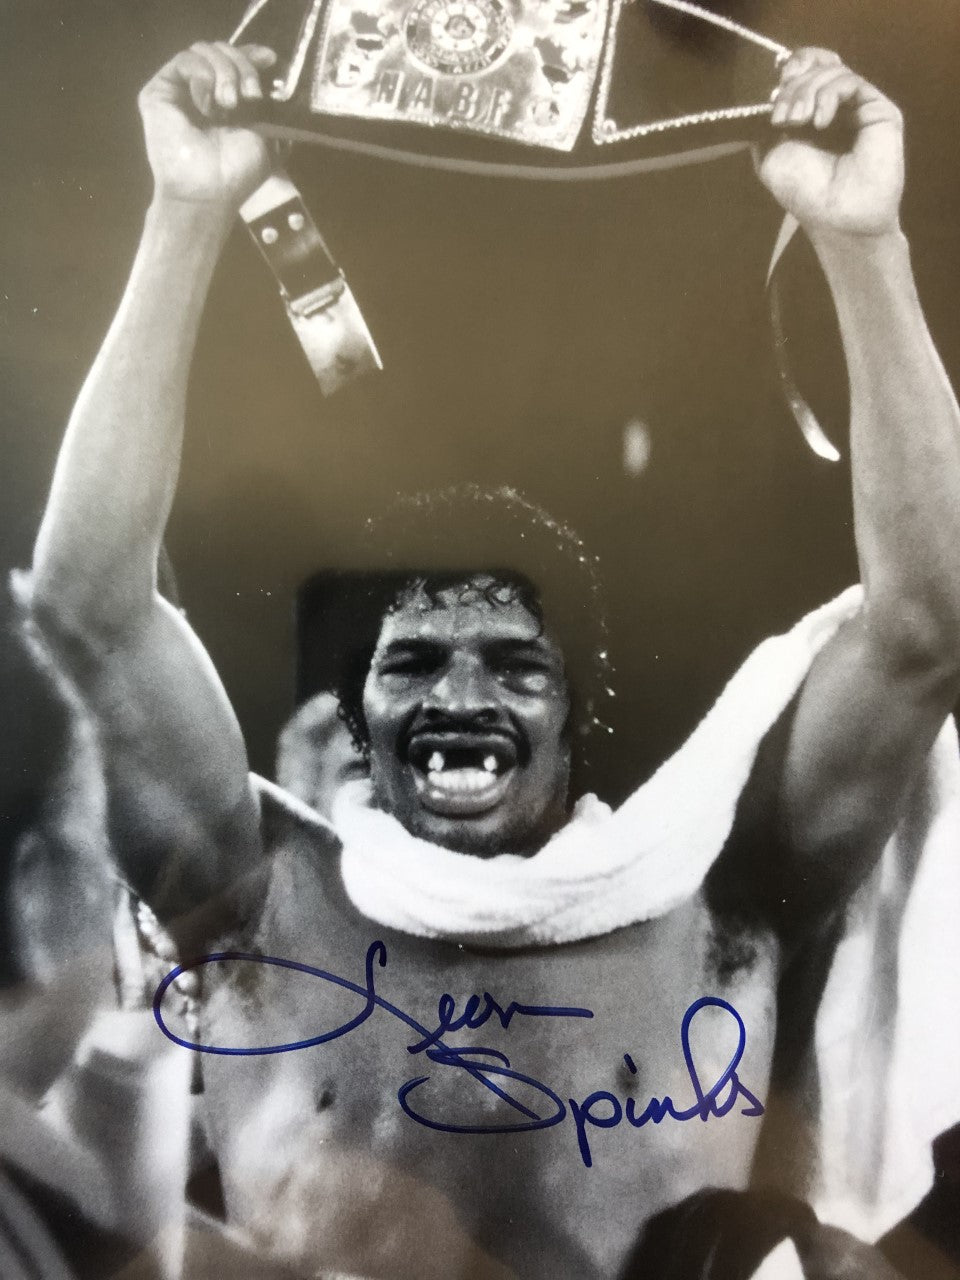 Leon Spinks Signed Autographed signed boxing photo 8x10 cert